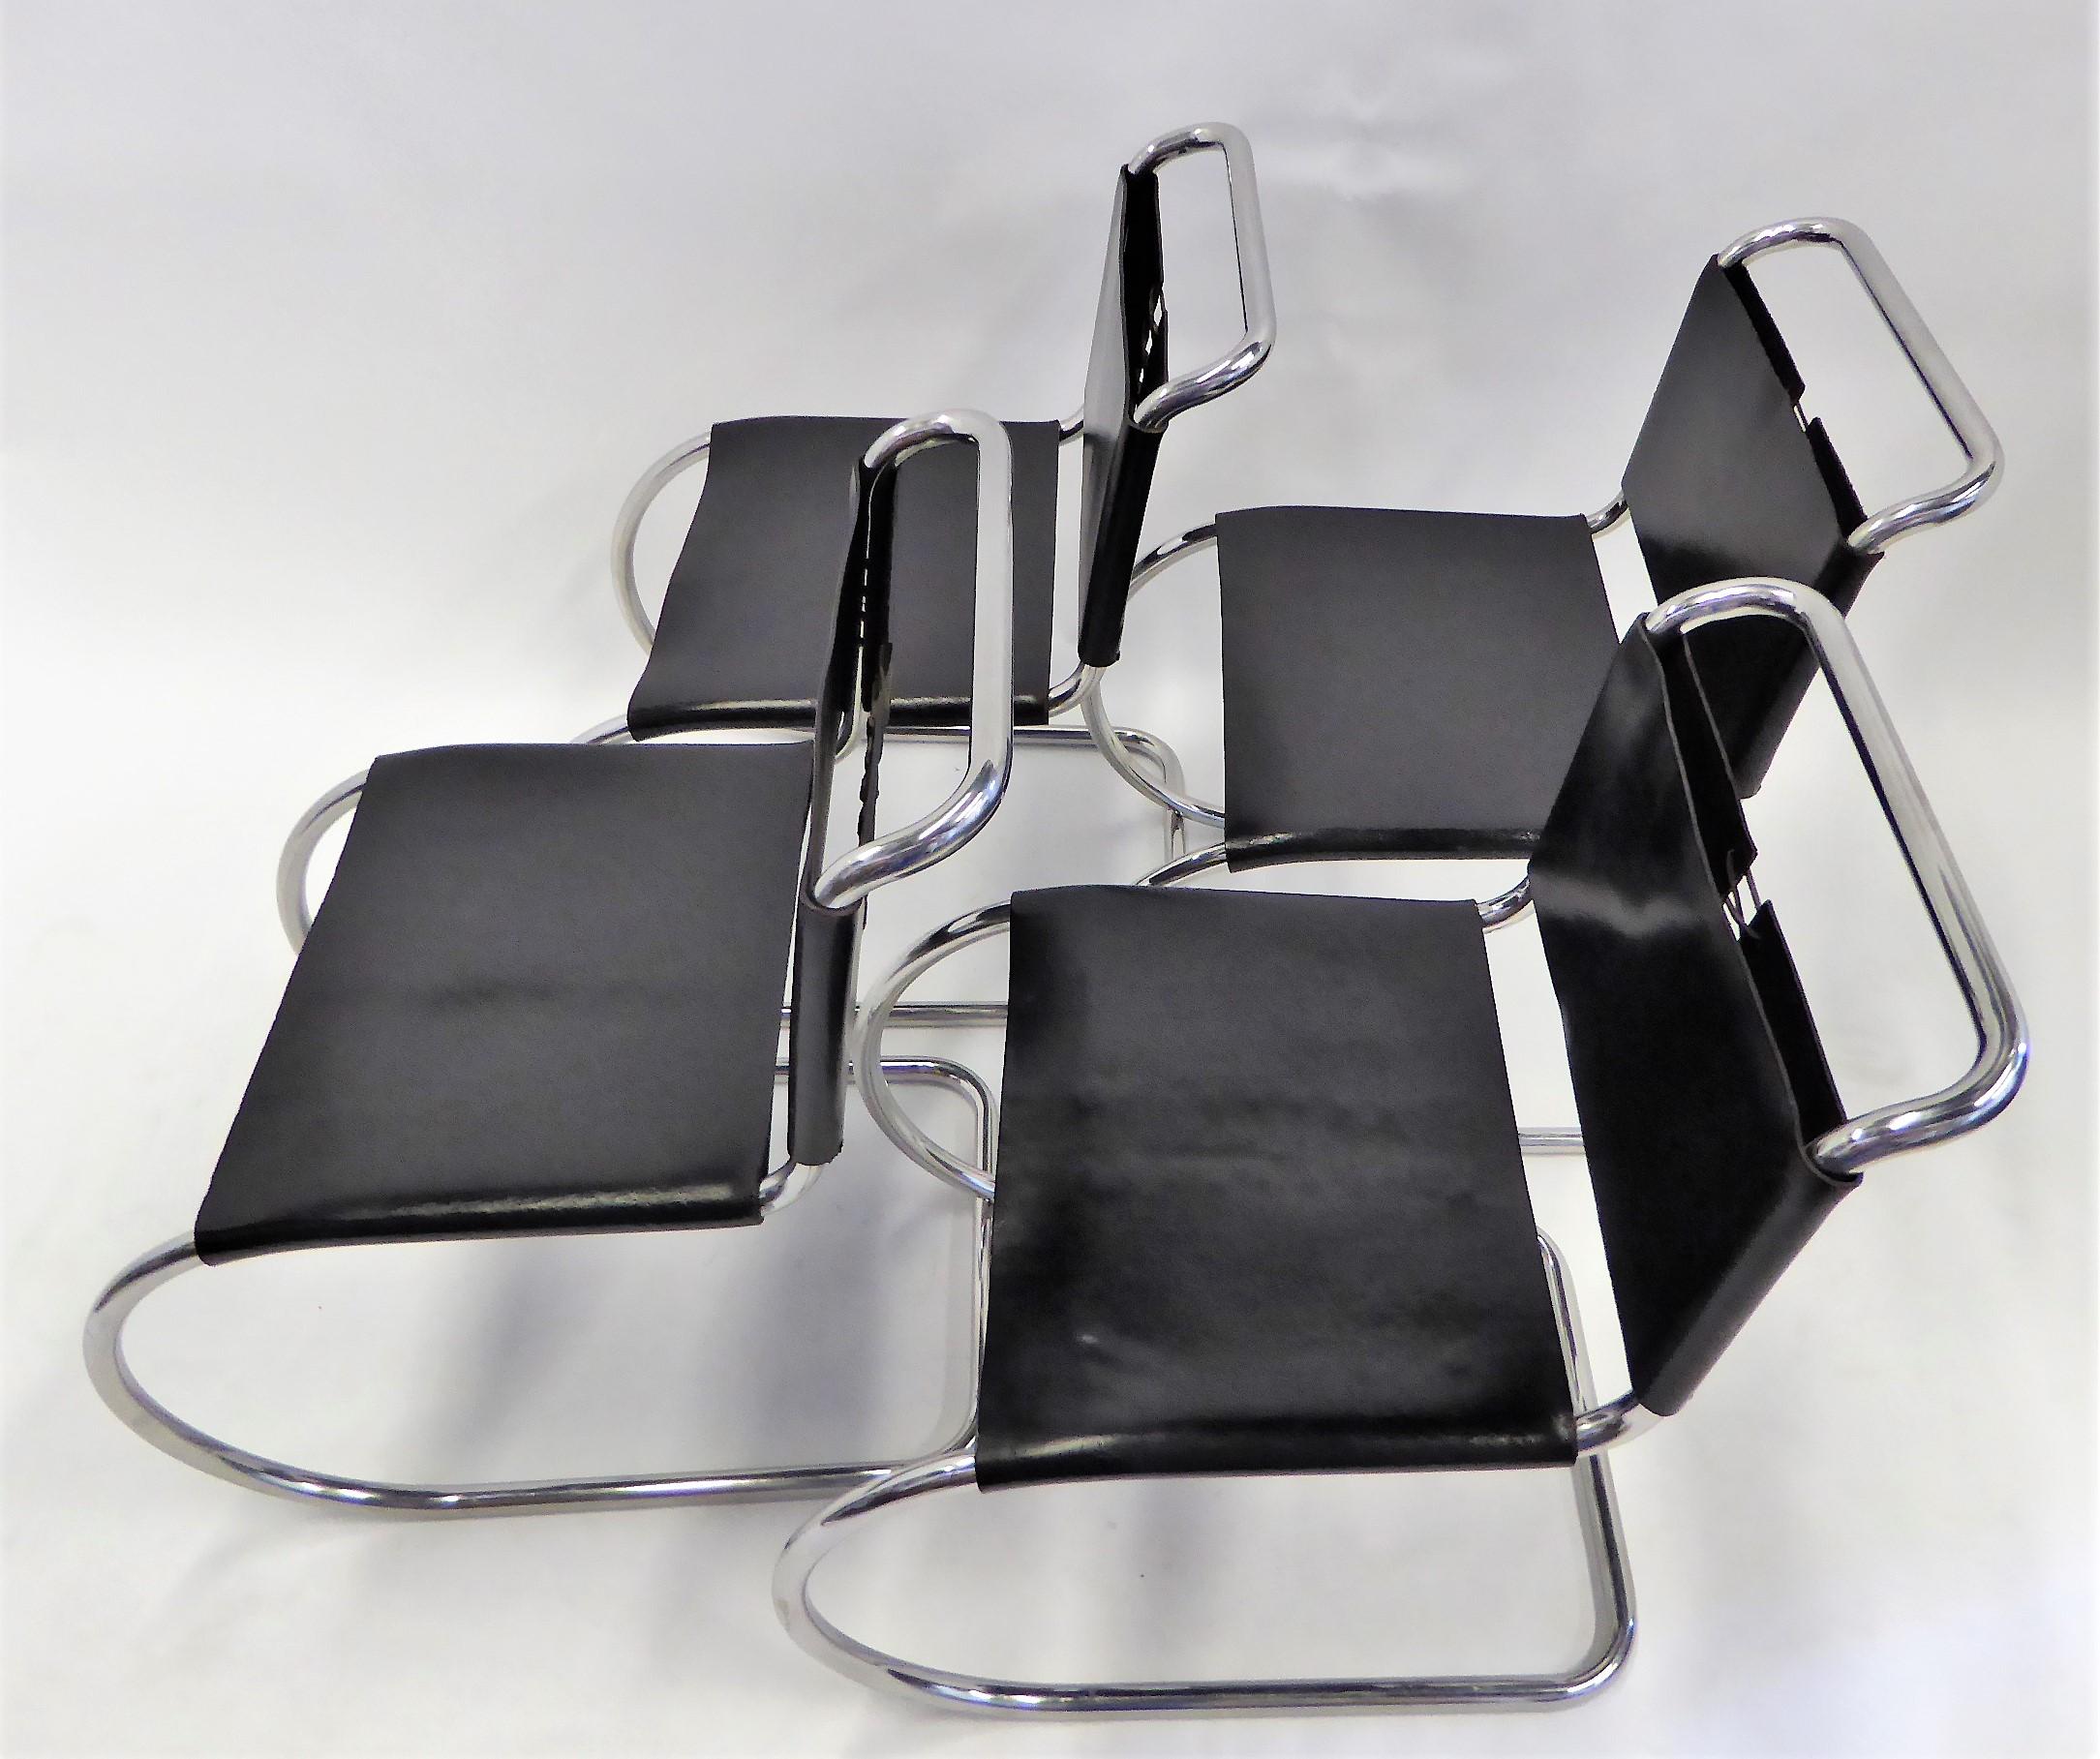 Reduced from $6,000....Produced in the 1960s, a set of 4 Classic laced black leather and chrome Mies van der Rohe MR10 cantilever chairs by Knoll International.  New leather lacing on the back and new cord lacing on seat.  All 4 retain the Knoll